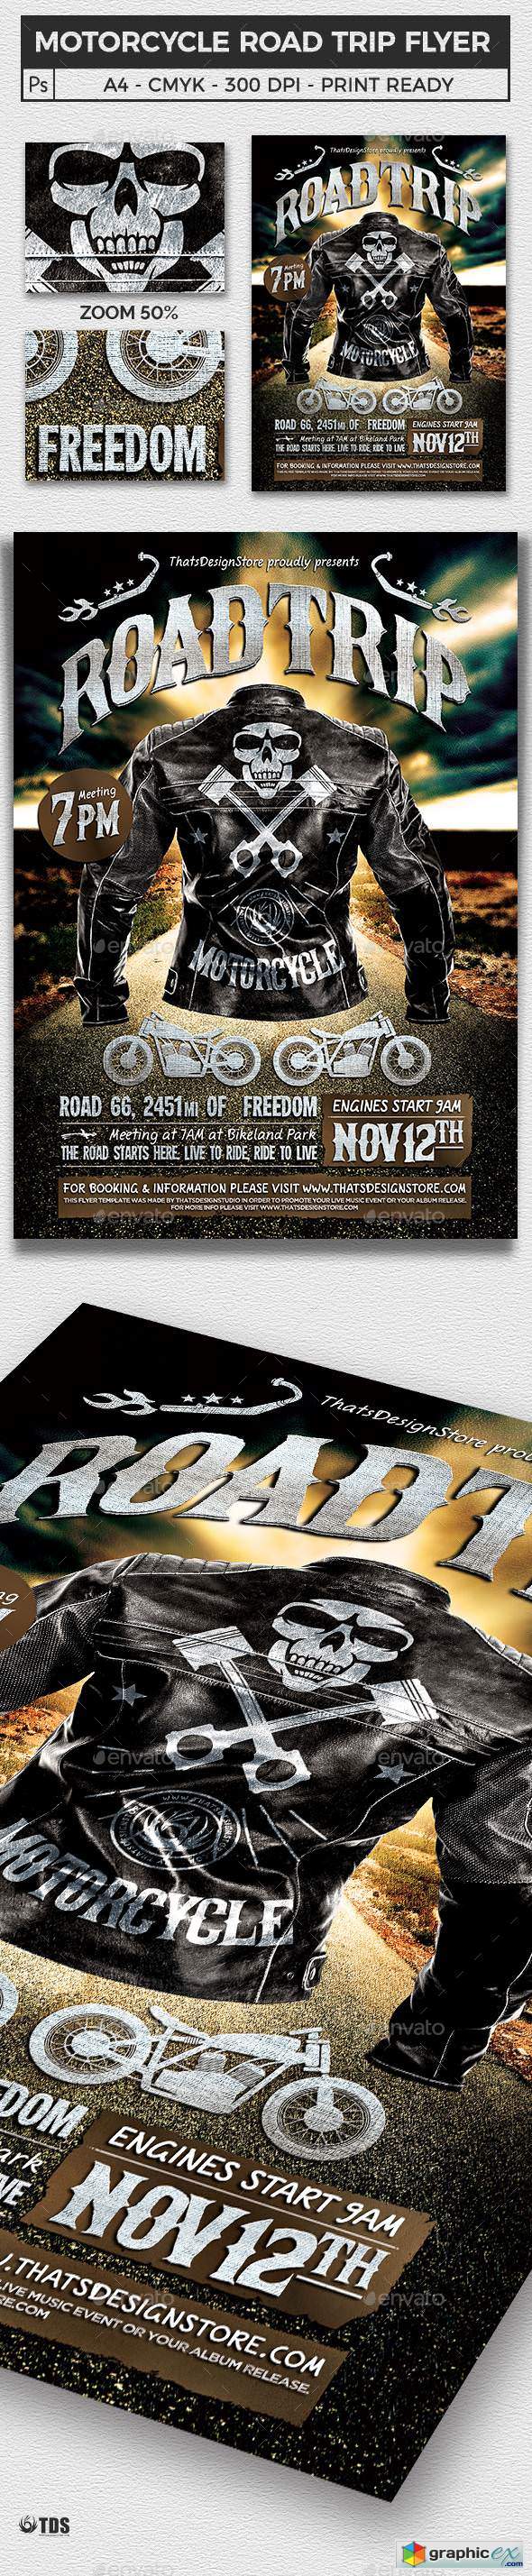 Motorcycle Road Trip Flyer Template V1